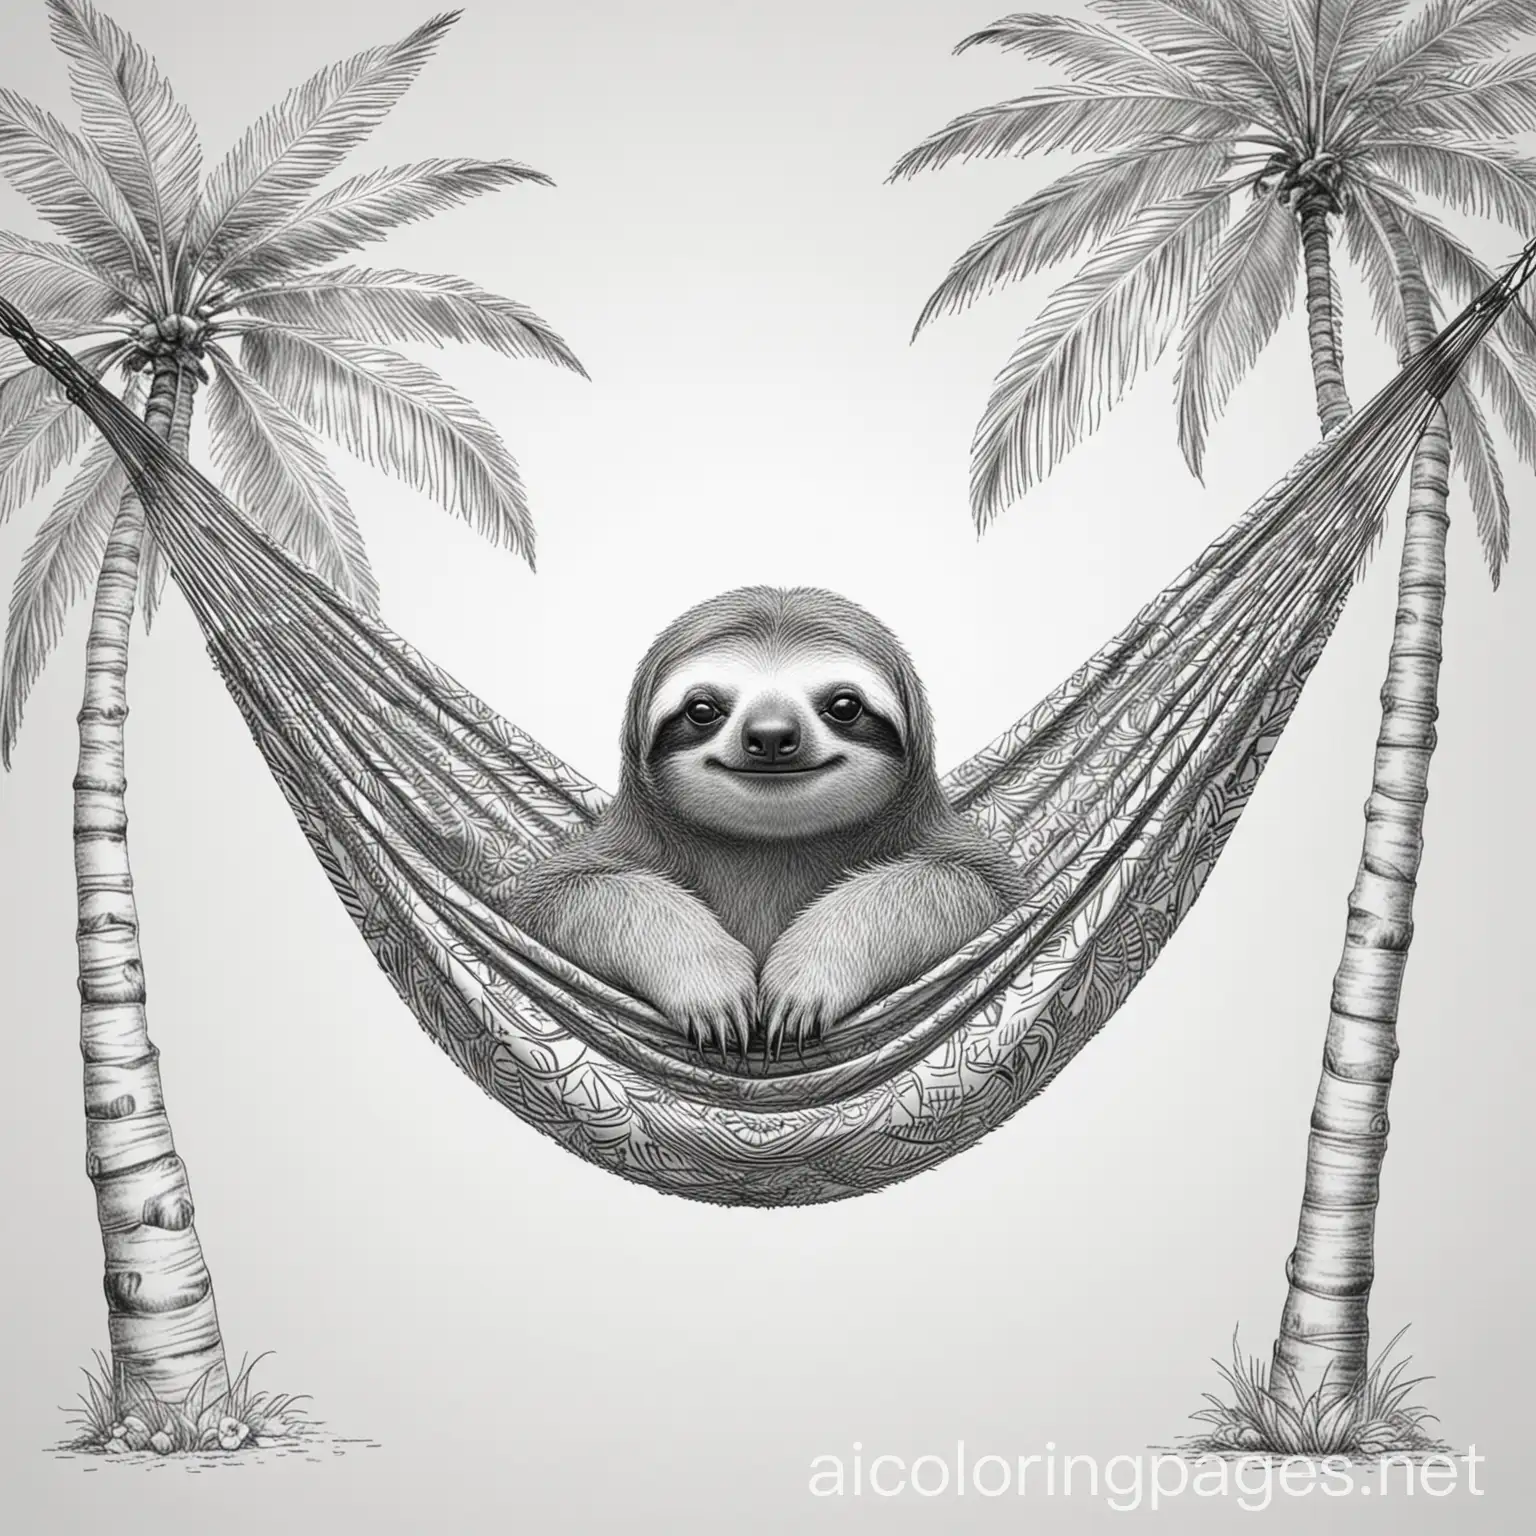 Relaxing-Summer-Sloth-on-Hammock-Between-Palm-Trees-Coloring-Page